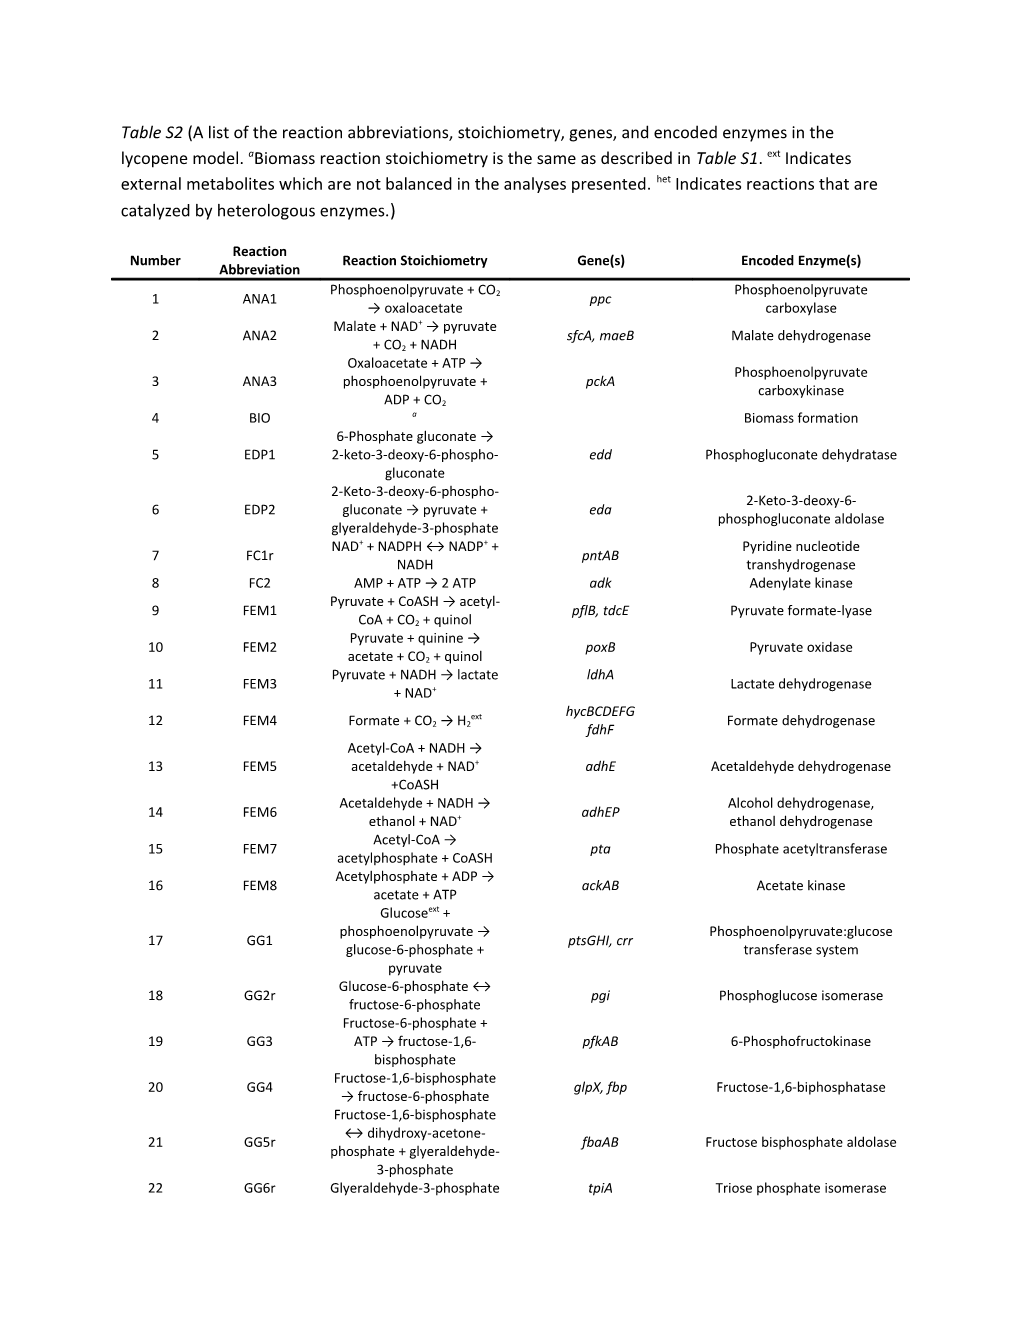 Table S2 (A List of the Reaction Abbreviations, Stoichiometry, Genes, and Encoded Enzymes